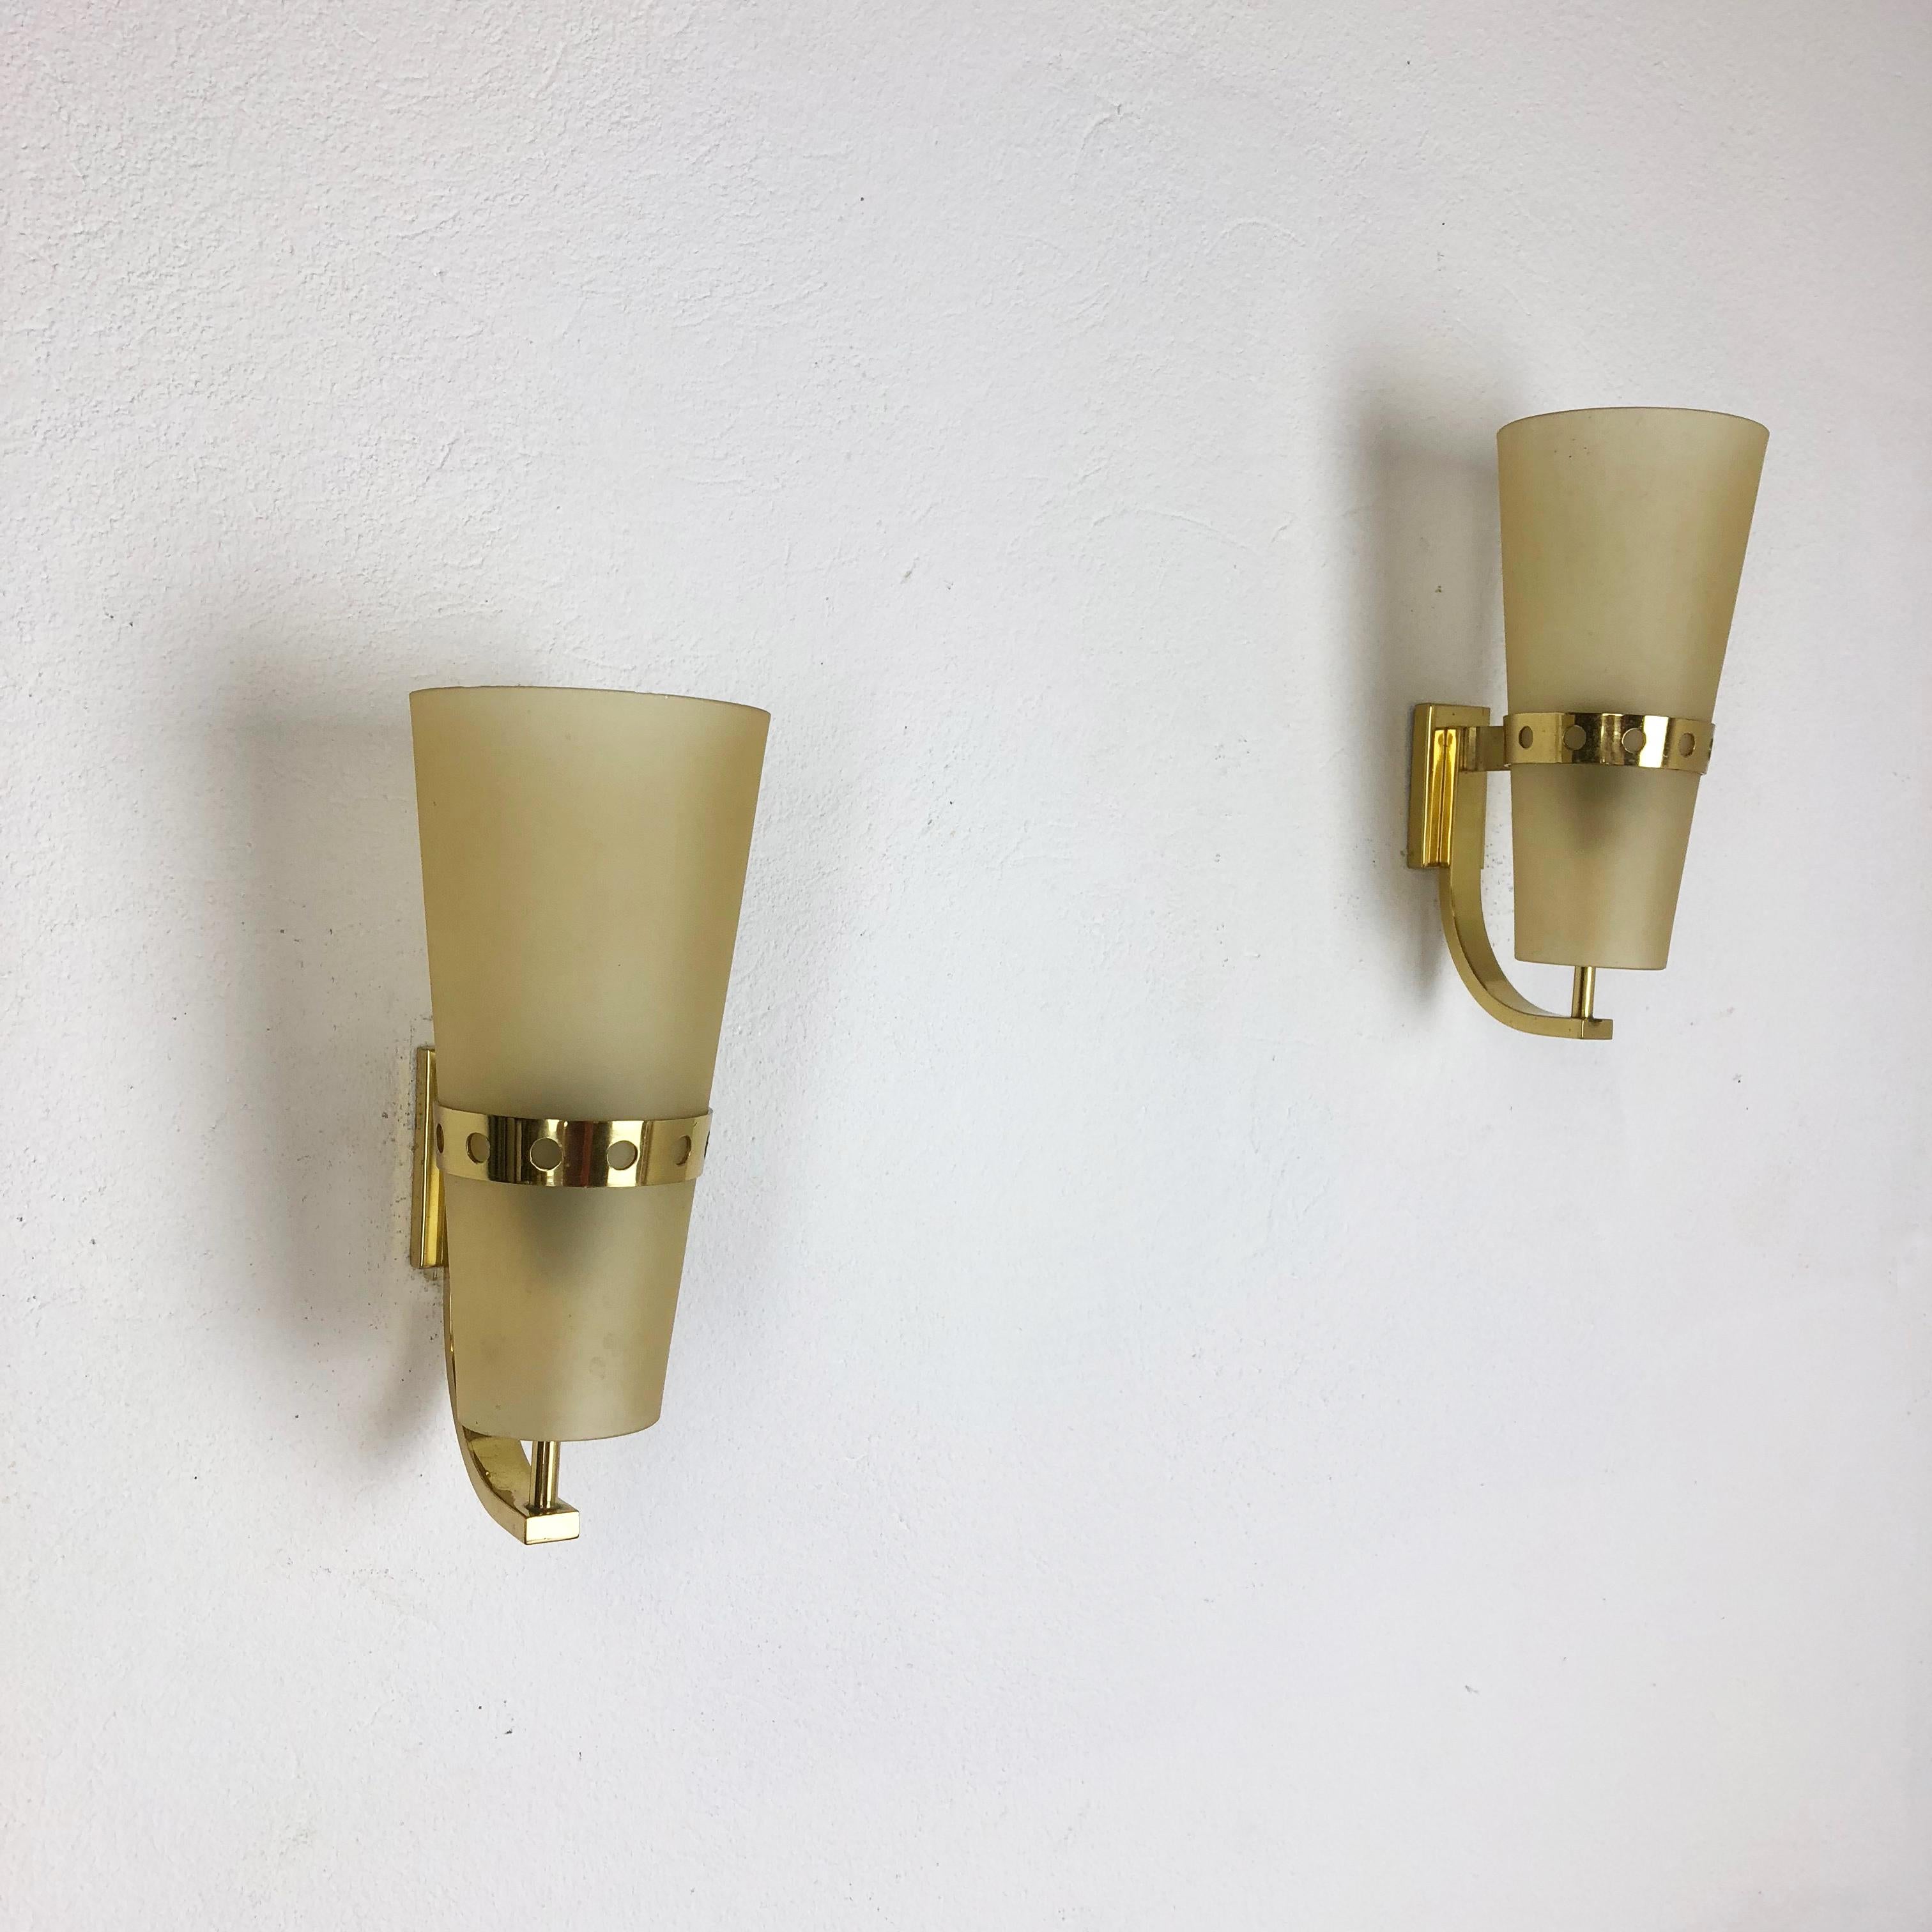 Article:

Set of two

Wall light scones


Origin:

Italy



Age:

1950s



This set of two modernist lights was produced in Italy in the 1950s. It is made from solid brass metal and has a lovely formed yellow satin shade. The